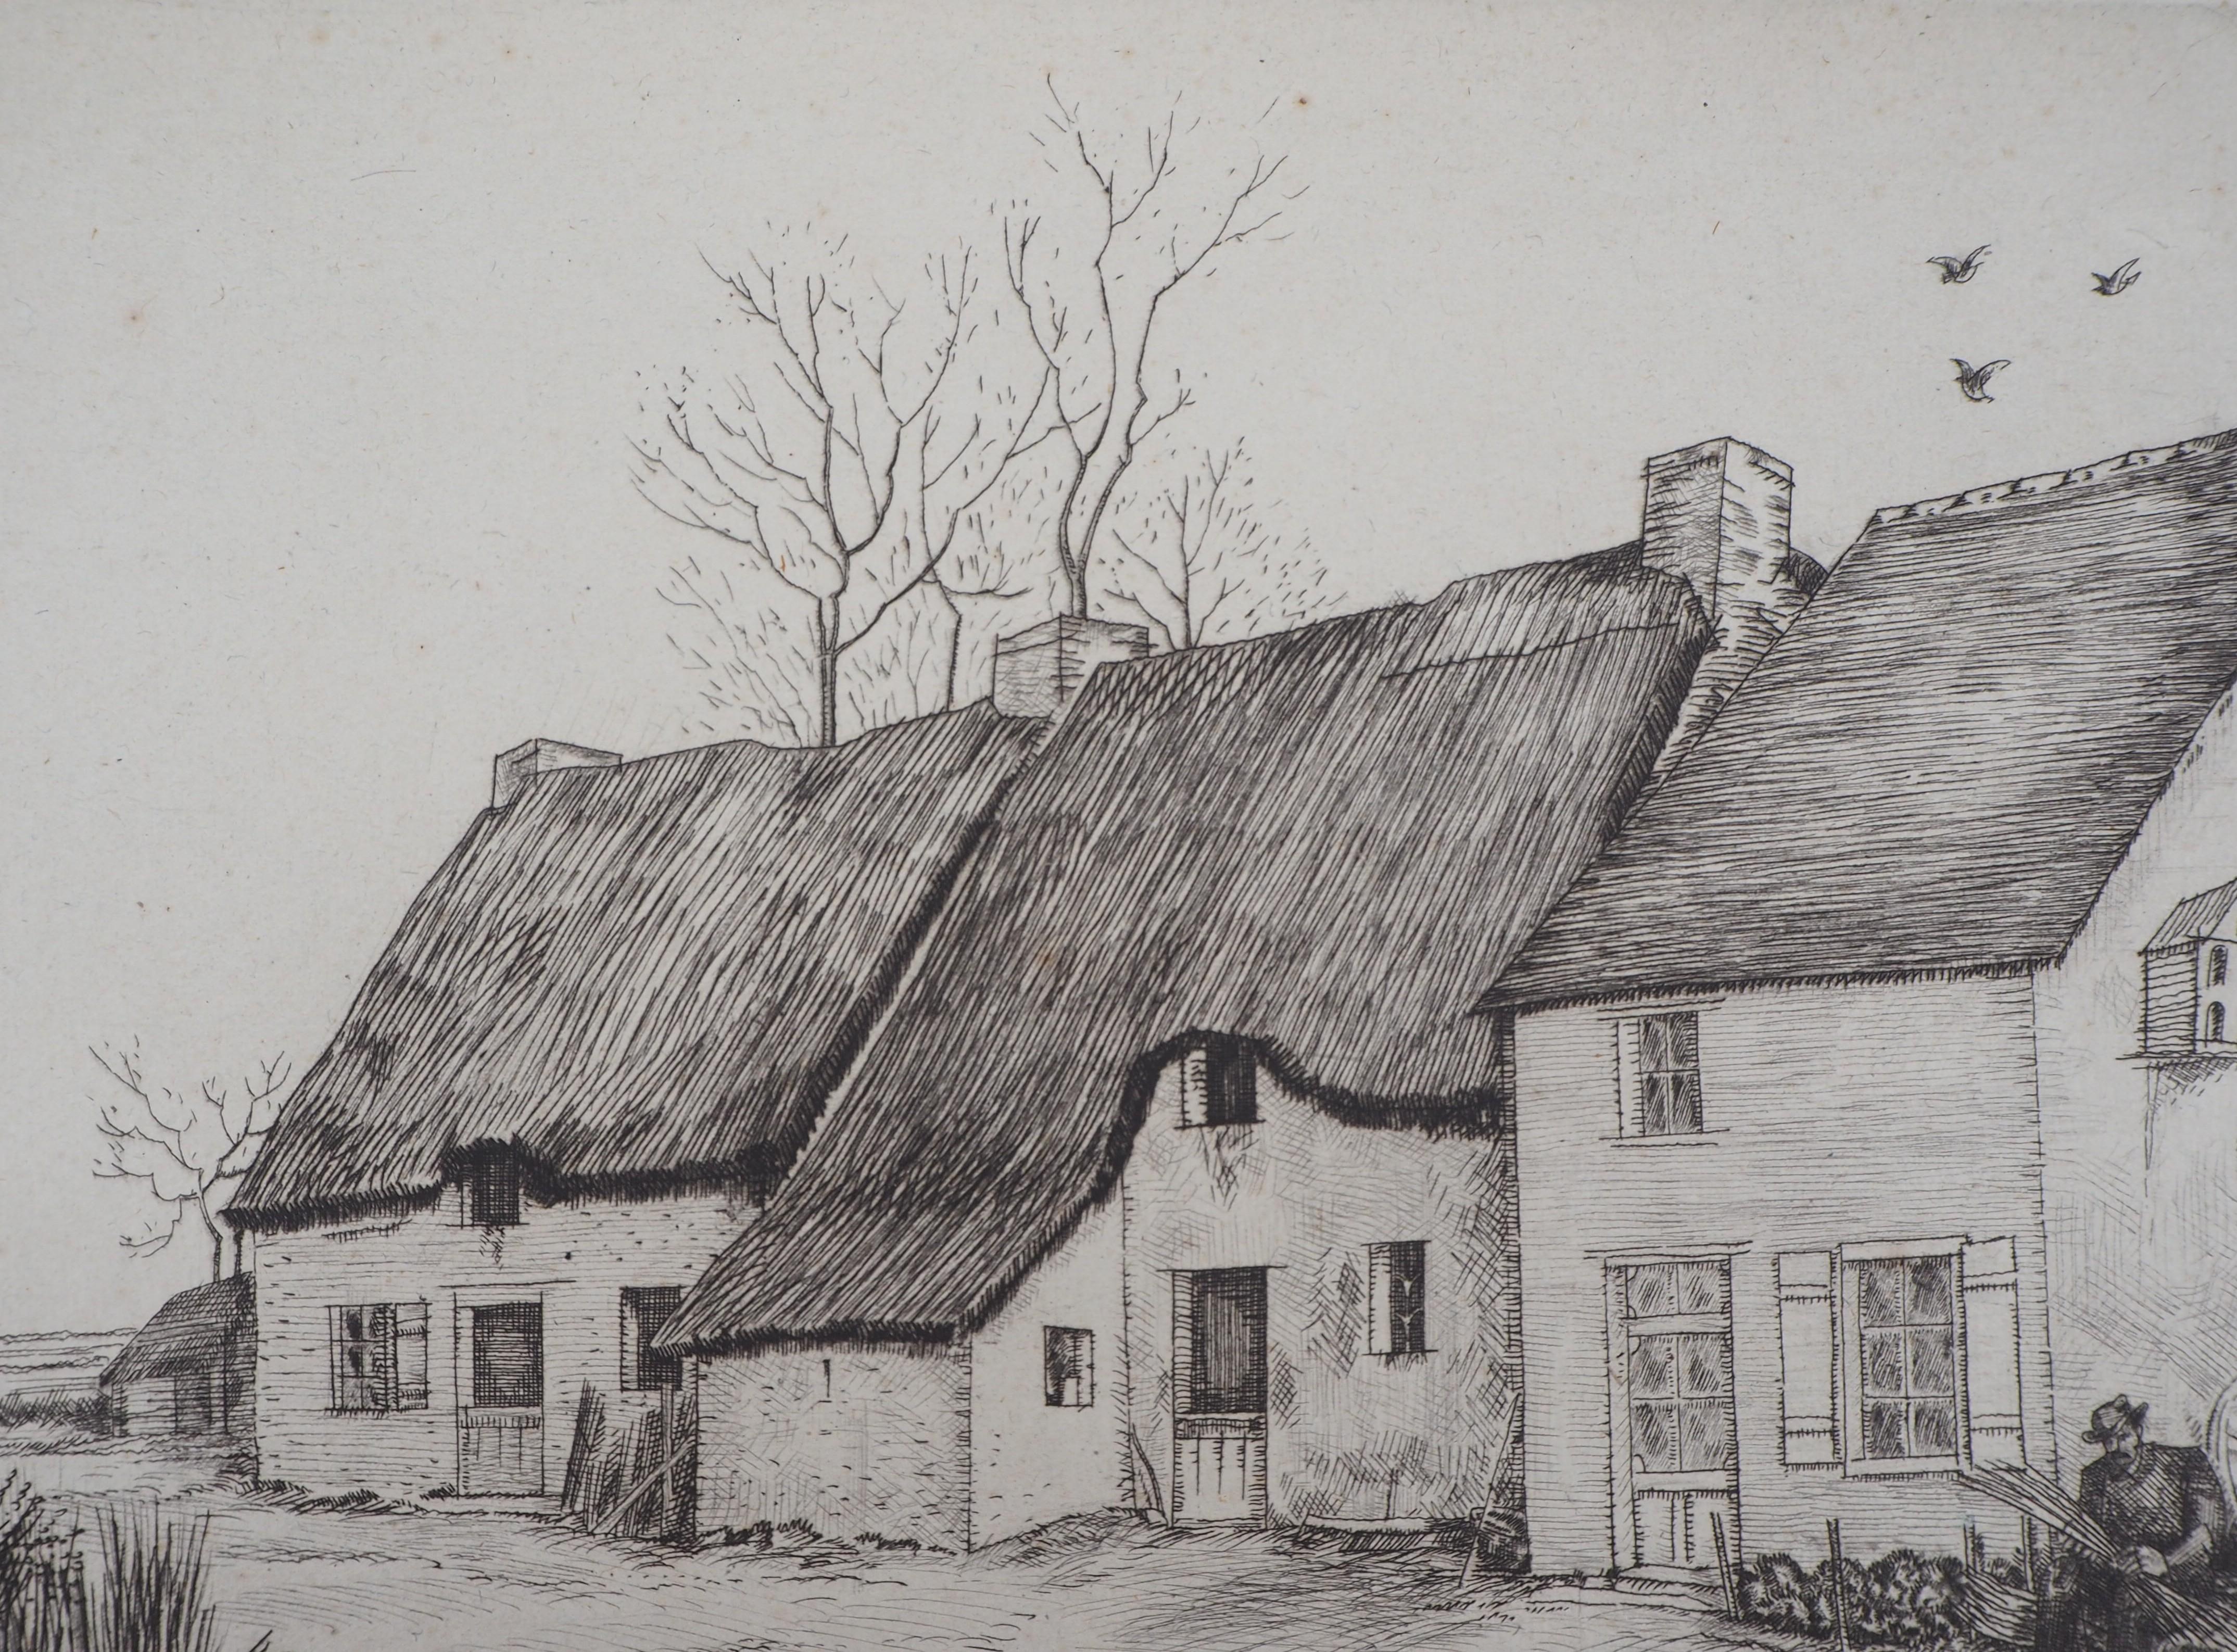 Houses in Brittany - Original Etching, Handsigned - Gray Landscape Print by Jean-Emile Laboureur